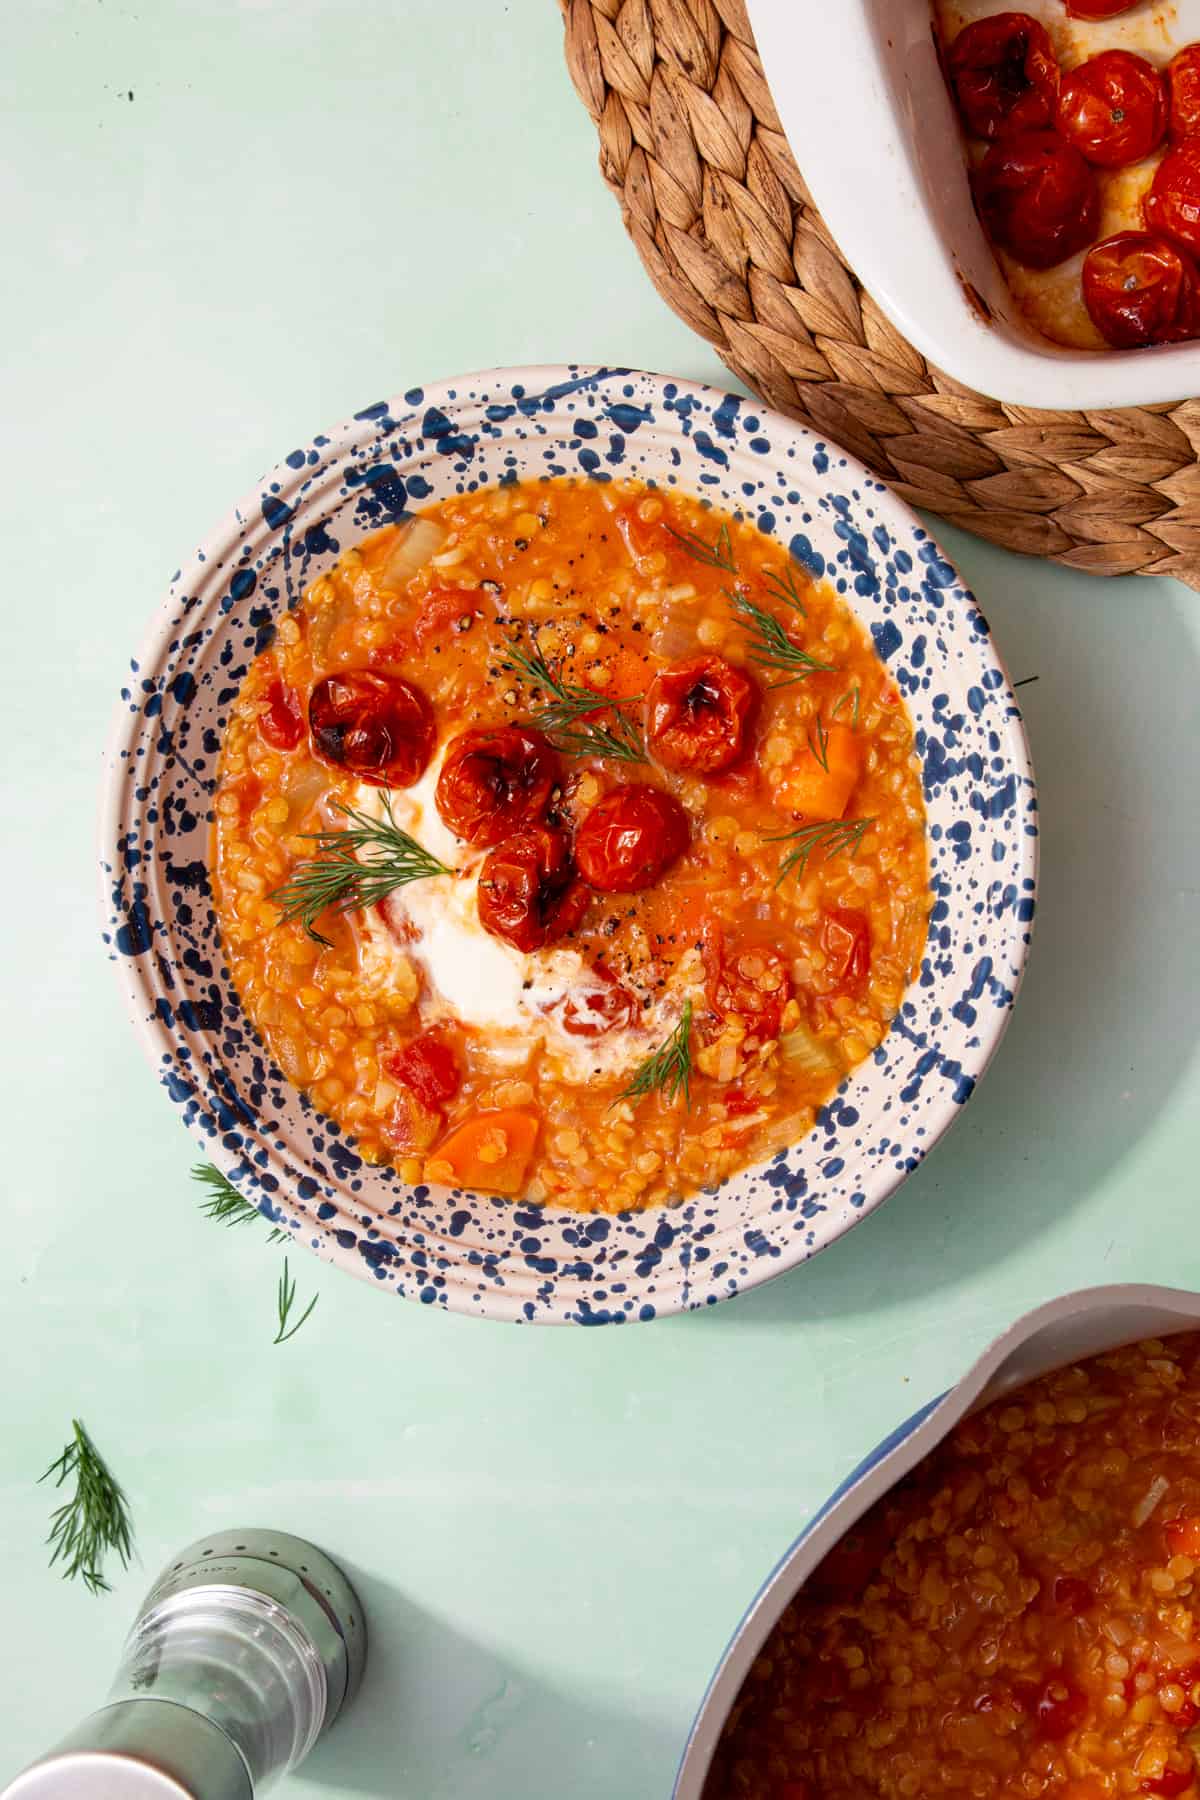 A patterned bowl full of red lentil soup with roasted cherry tomatoes, some dill and a dollop of creme fraiche with a baking tray with roasted tomatoes in partial view.